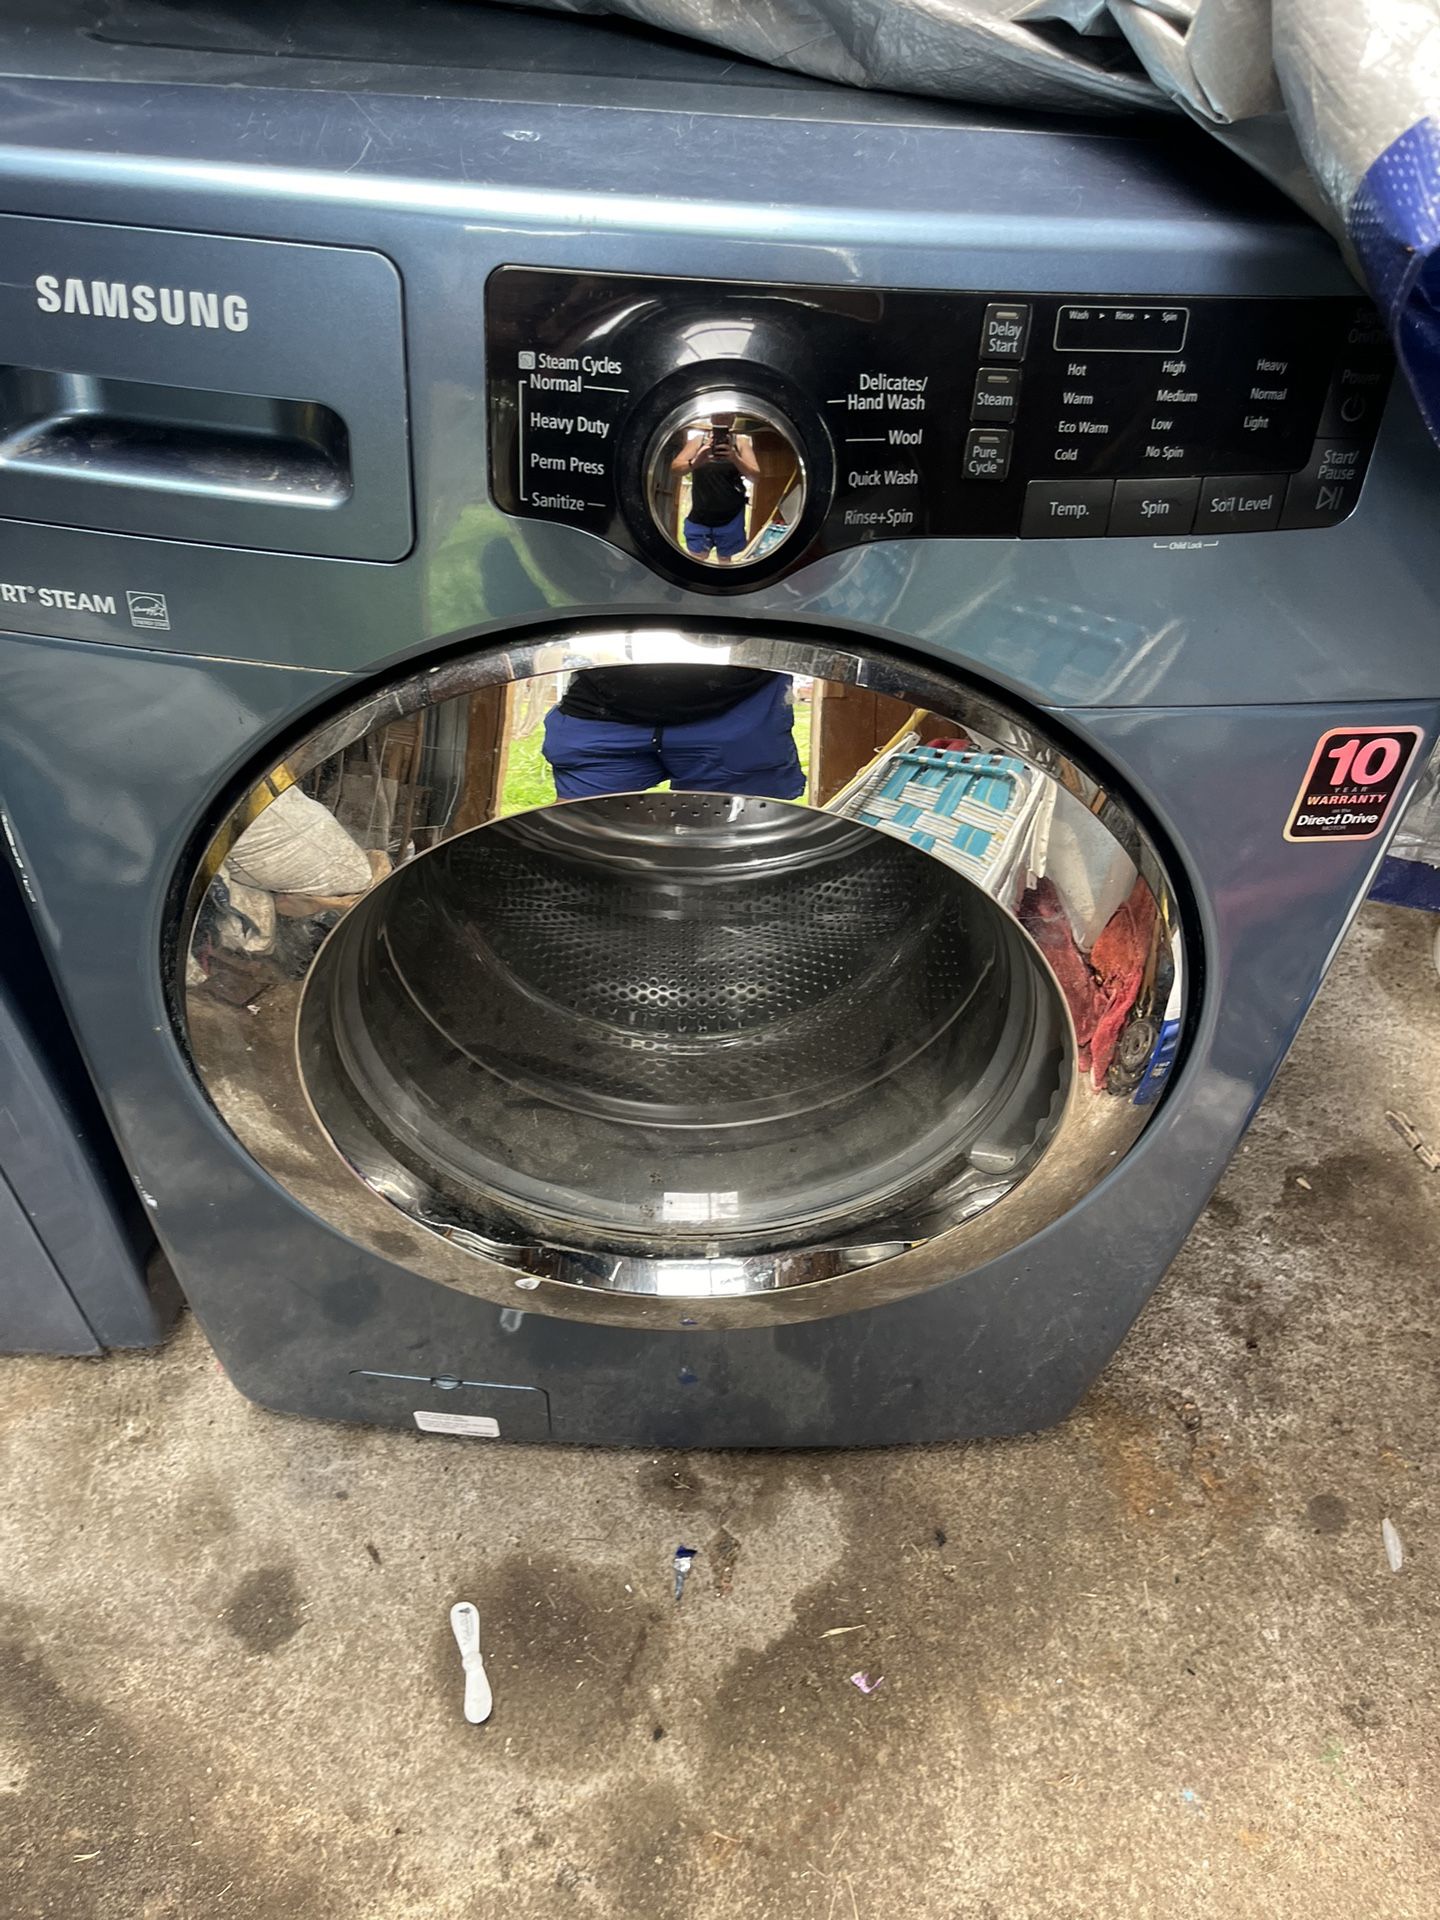 A Samsung Washer And Dryer